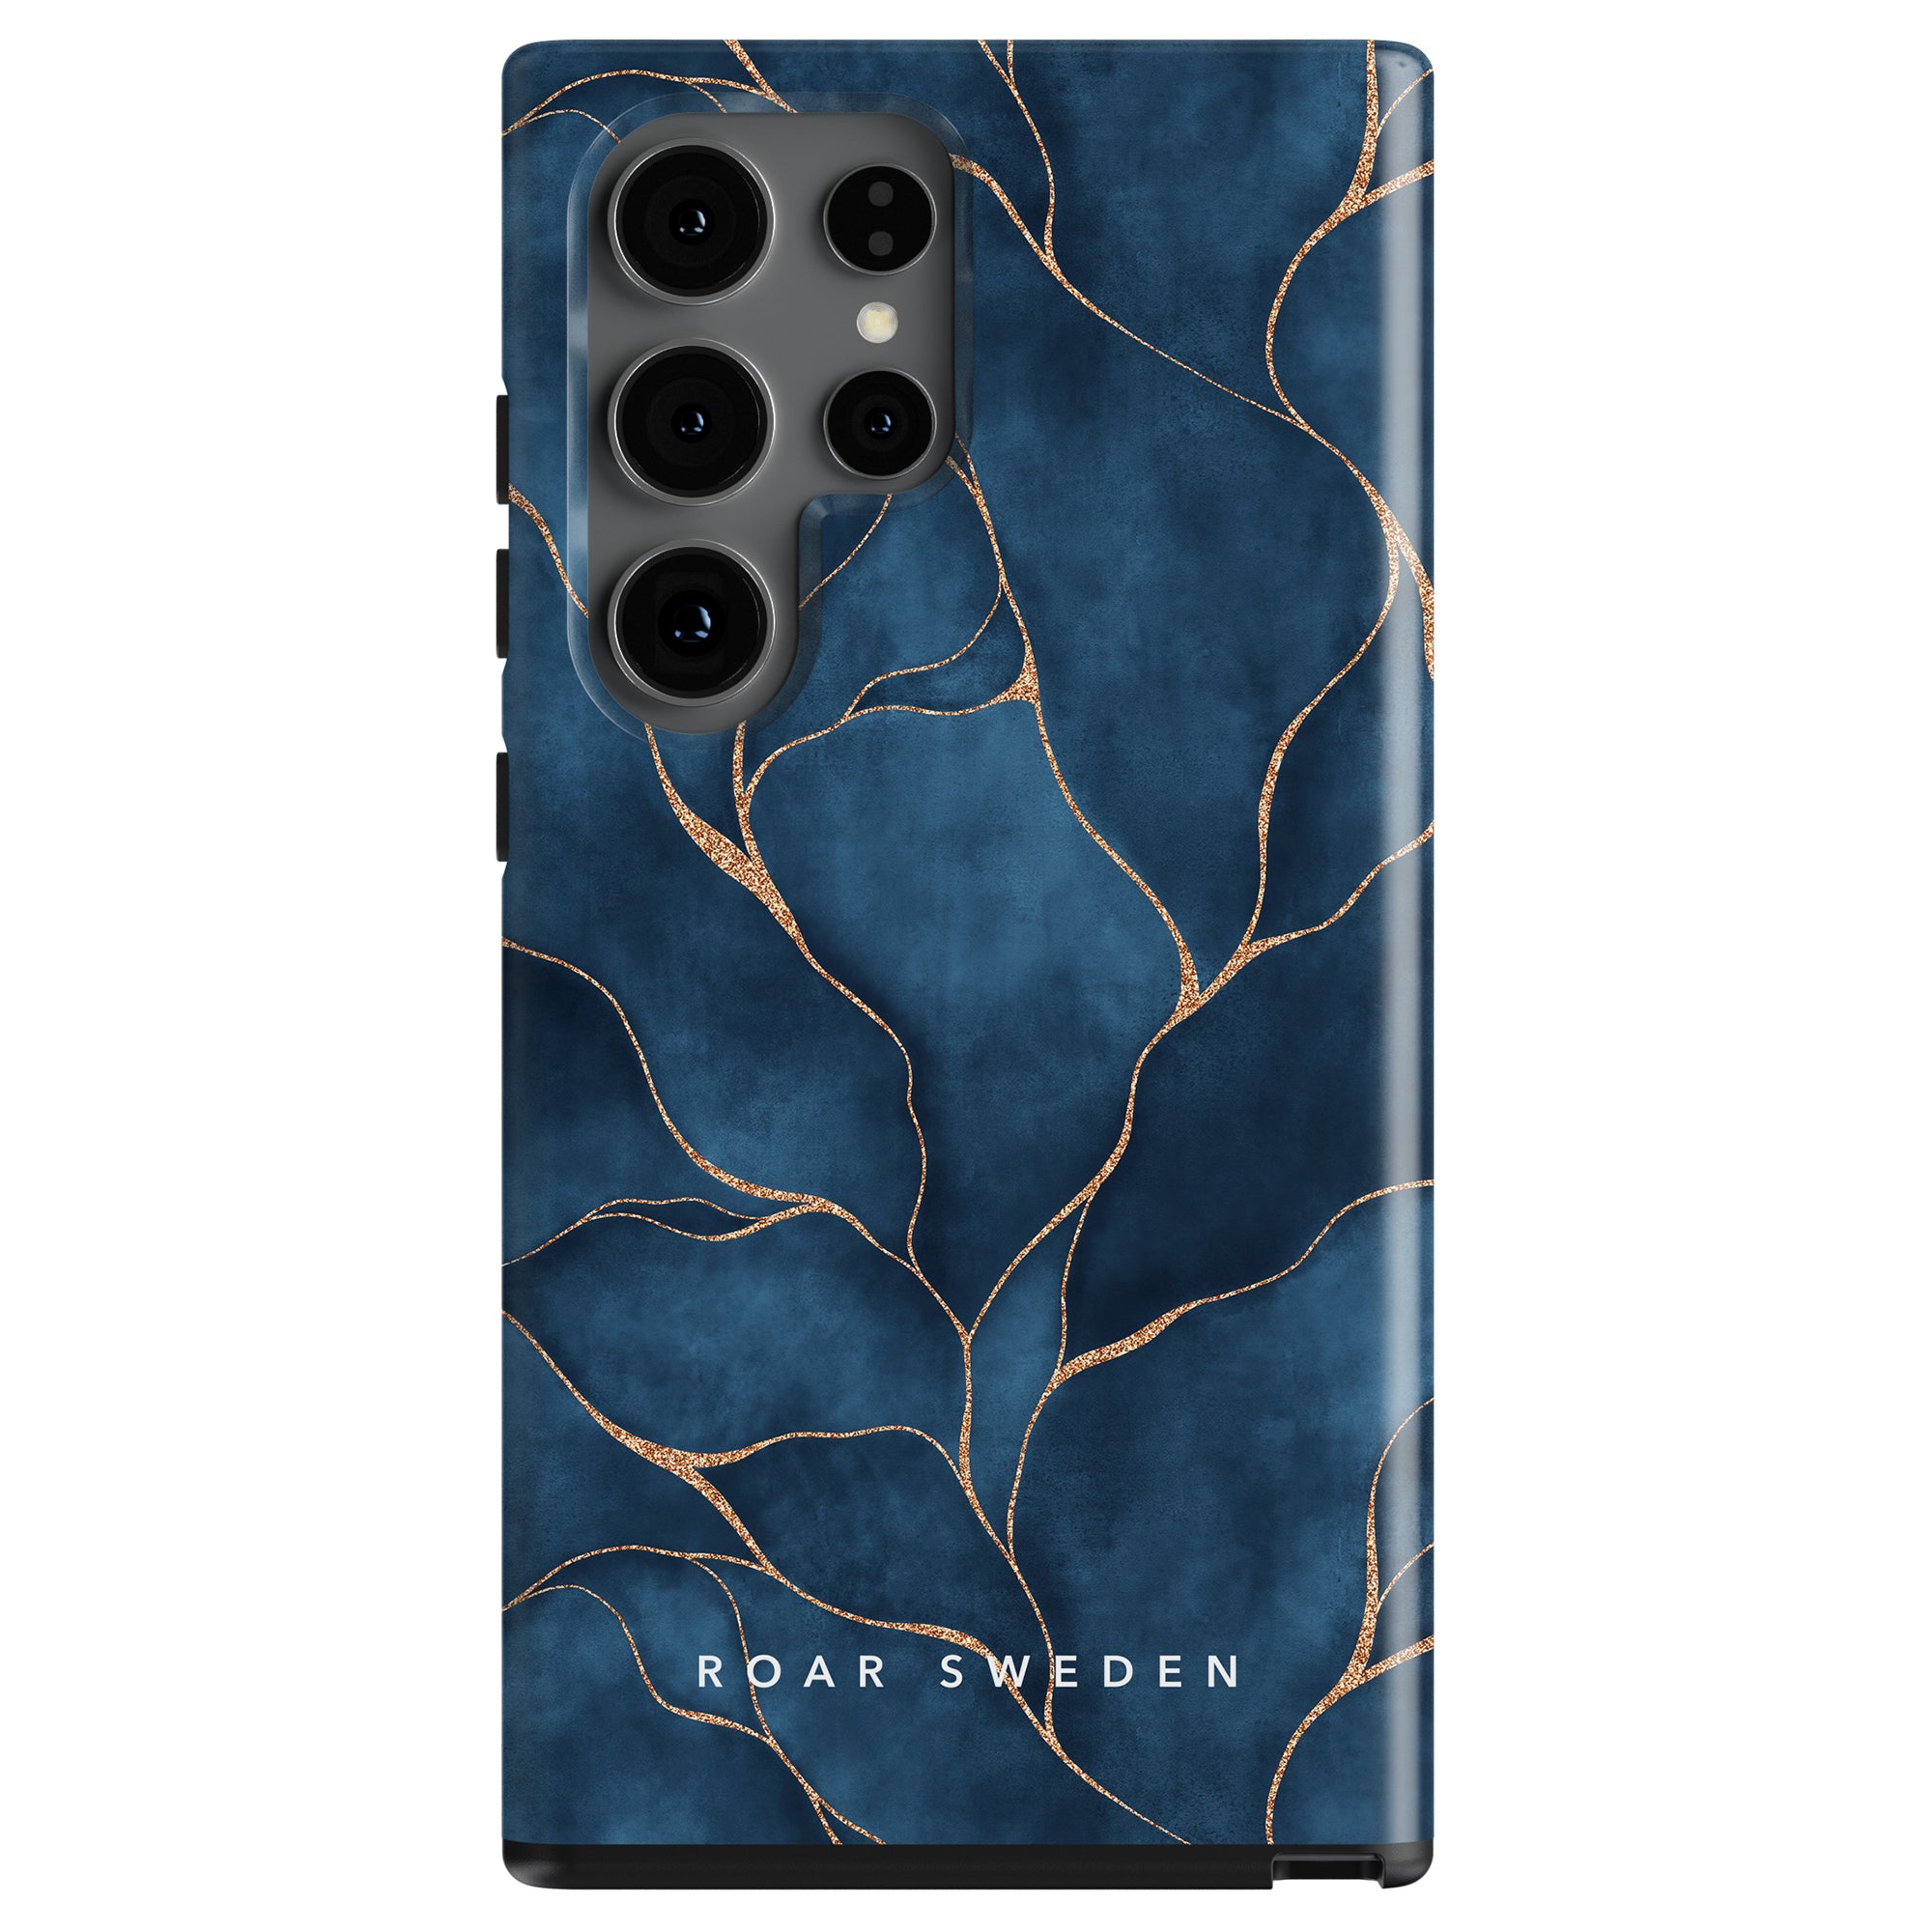 Yggdrasil - Tough Case with a blue and gold marbling design containing the text "roar Sweden.